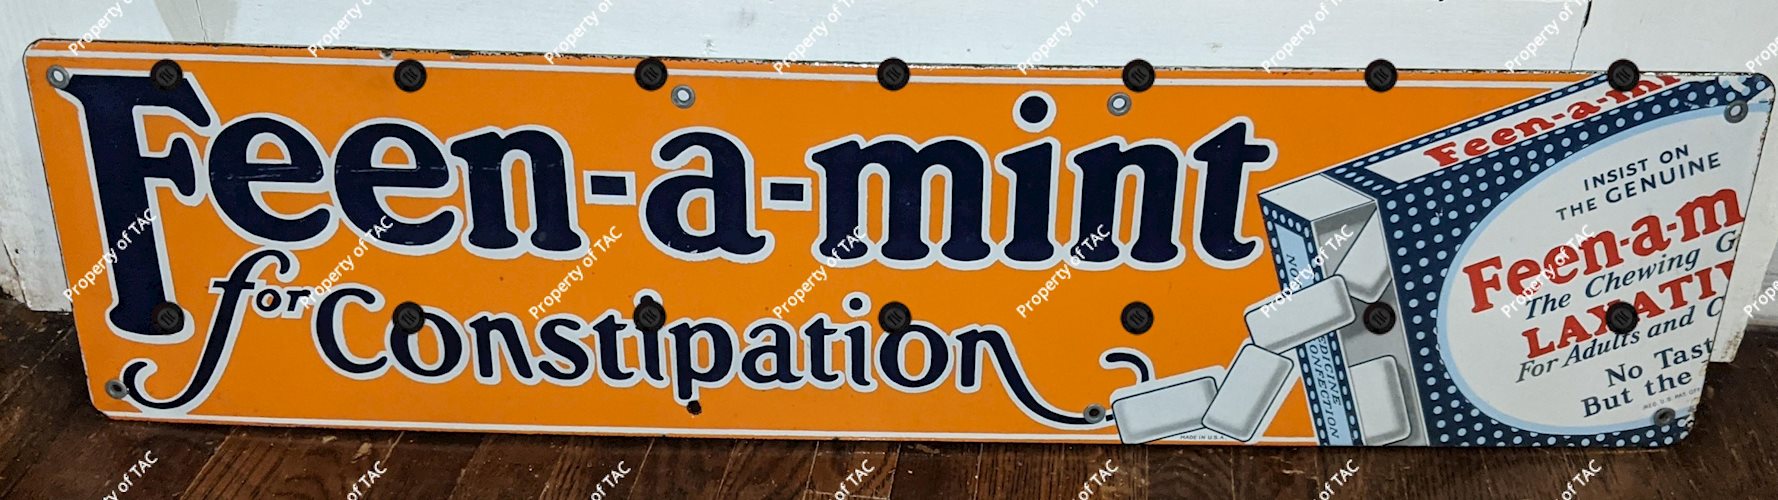 Feen-a-mint For Constipation Single Sided Porcelain Sign